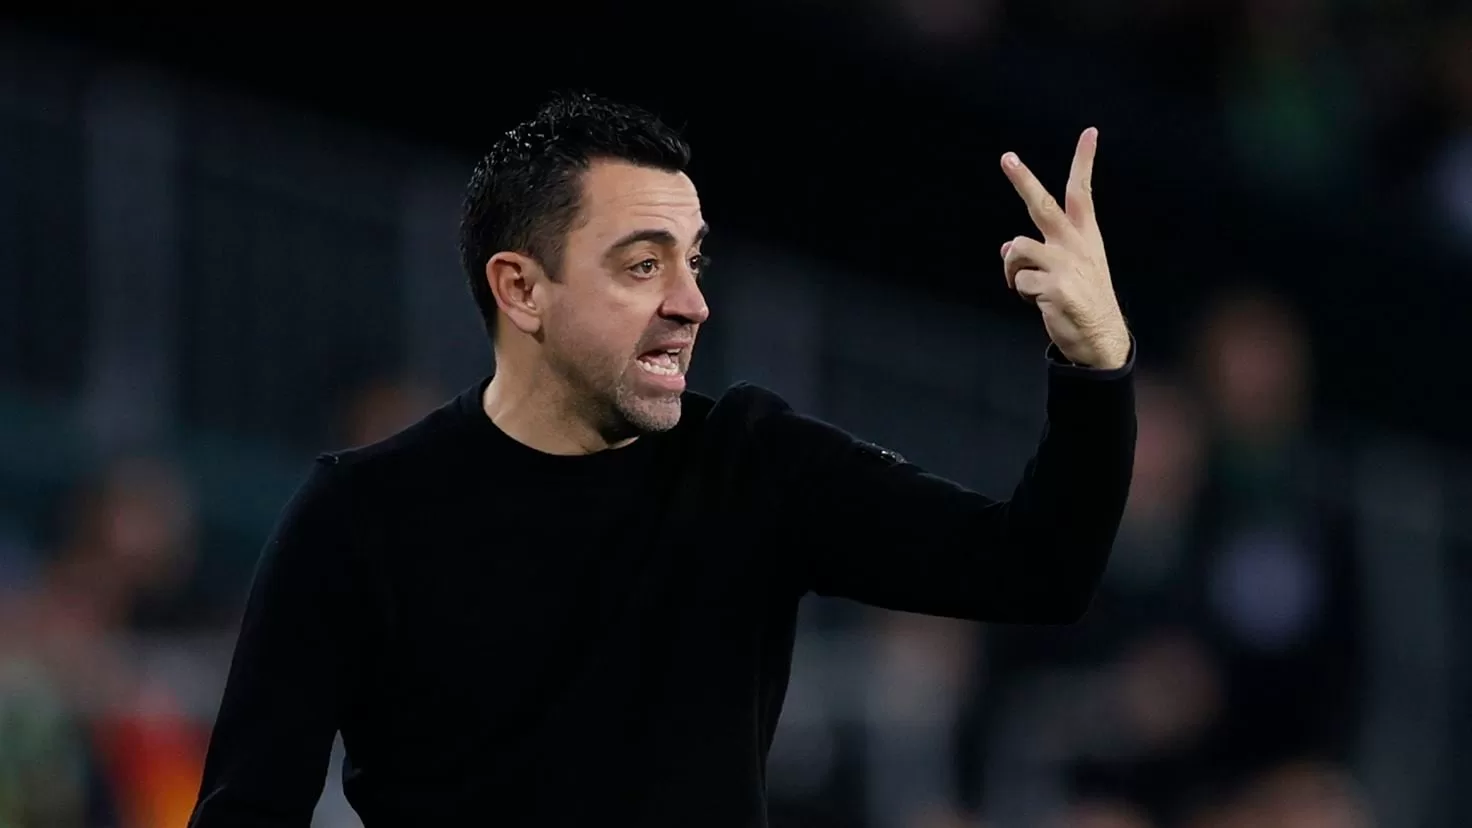 El Chiringuito records Xavi committing a driving violation that could cost him 6 points
